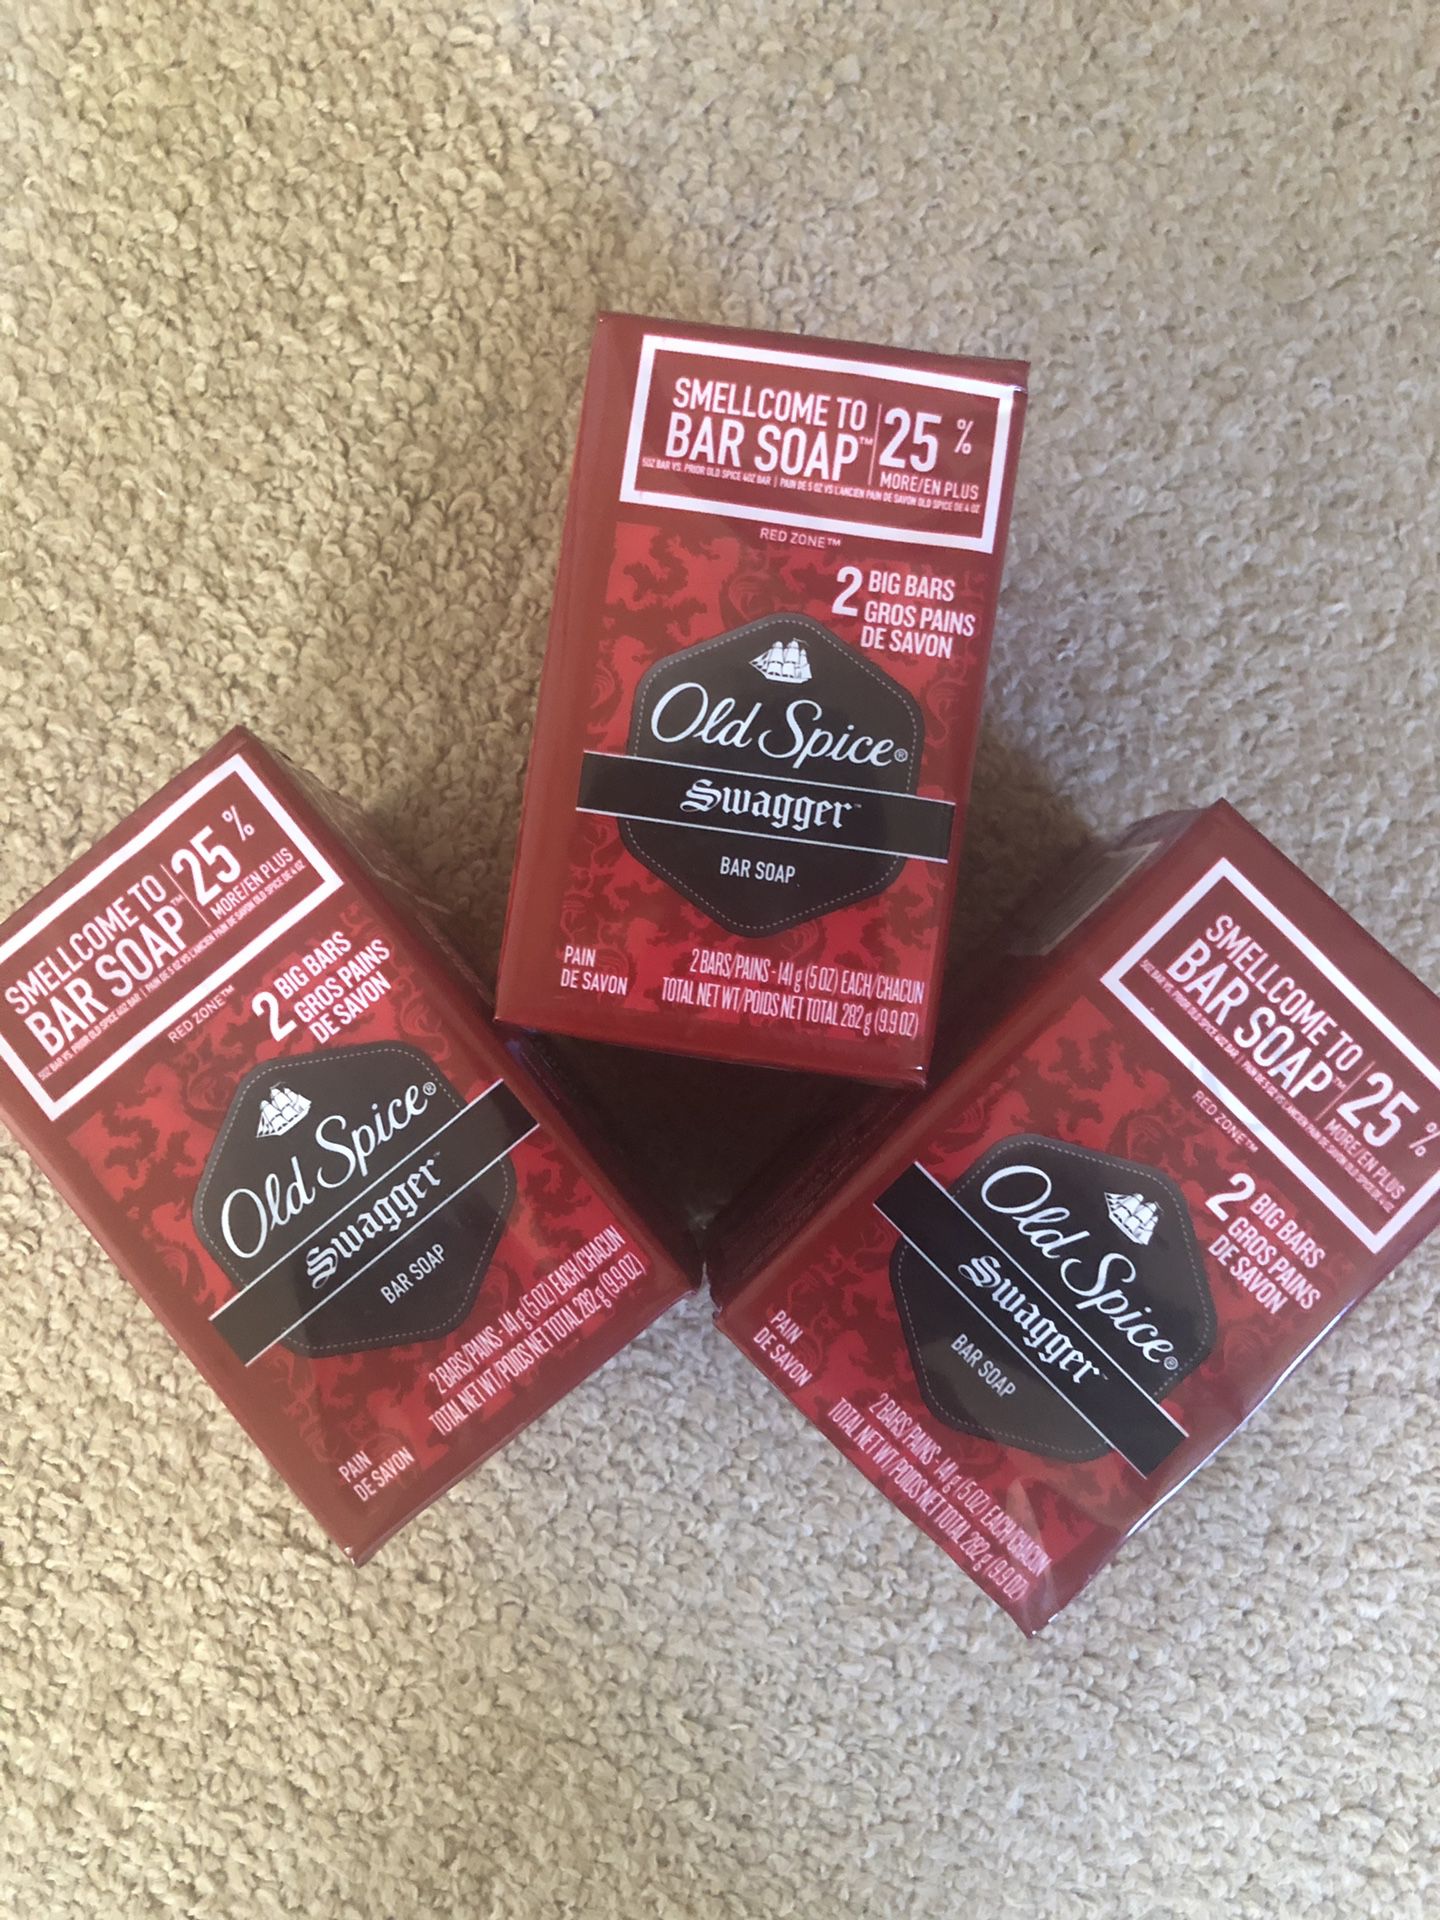 3 Old Spice soap bars